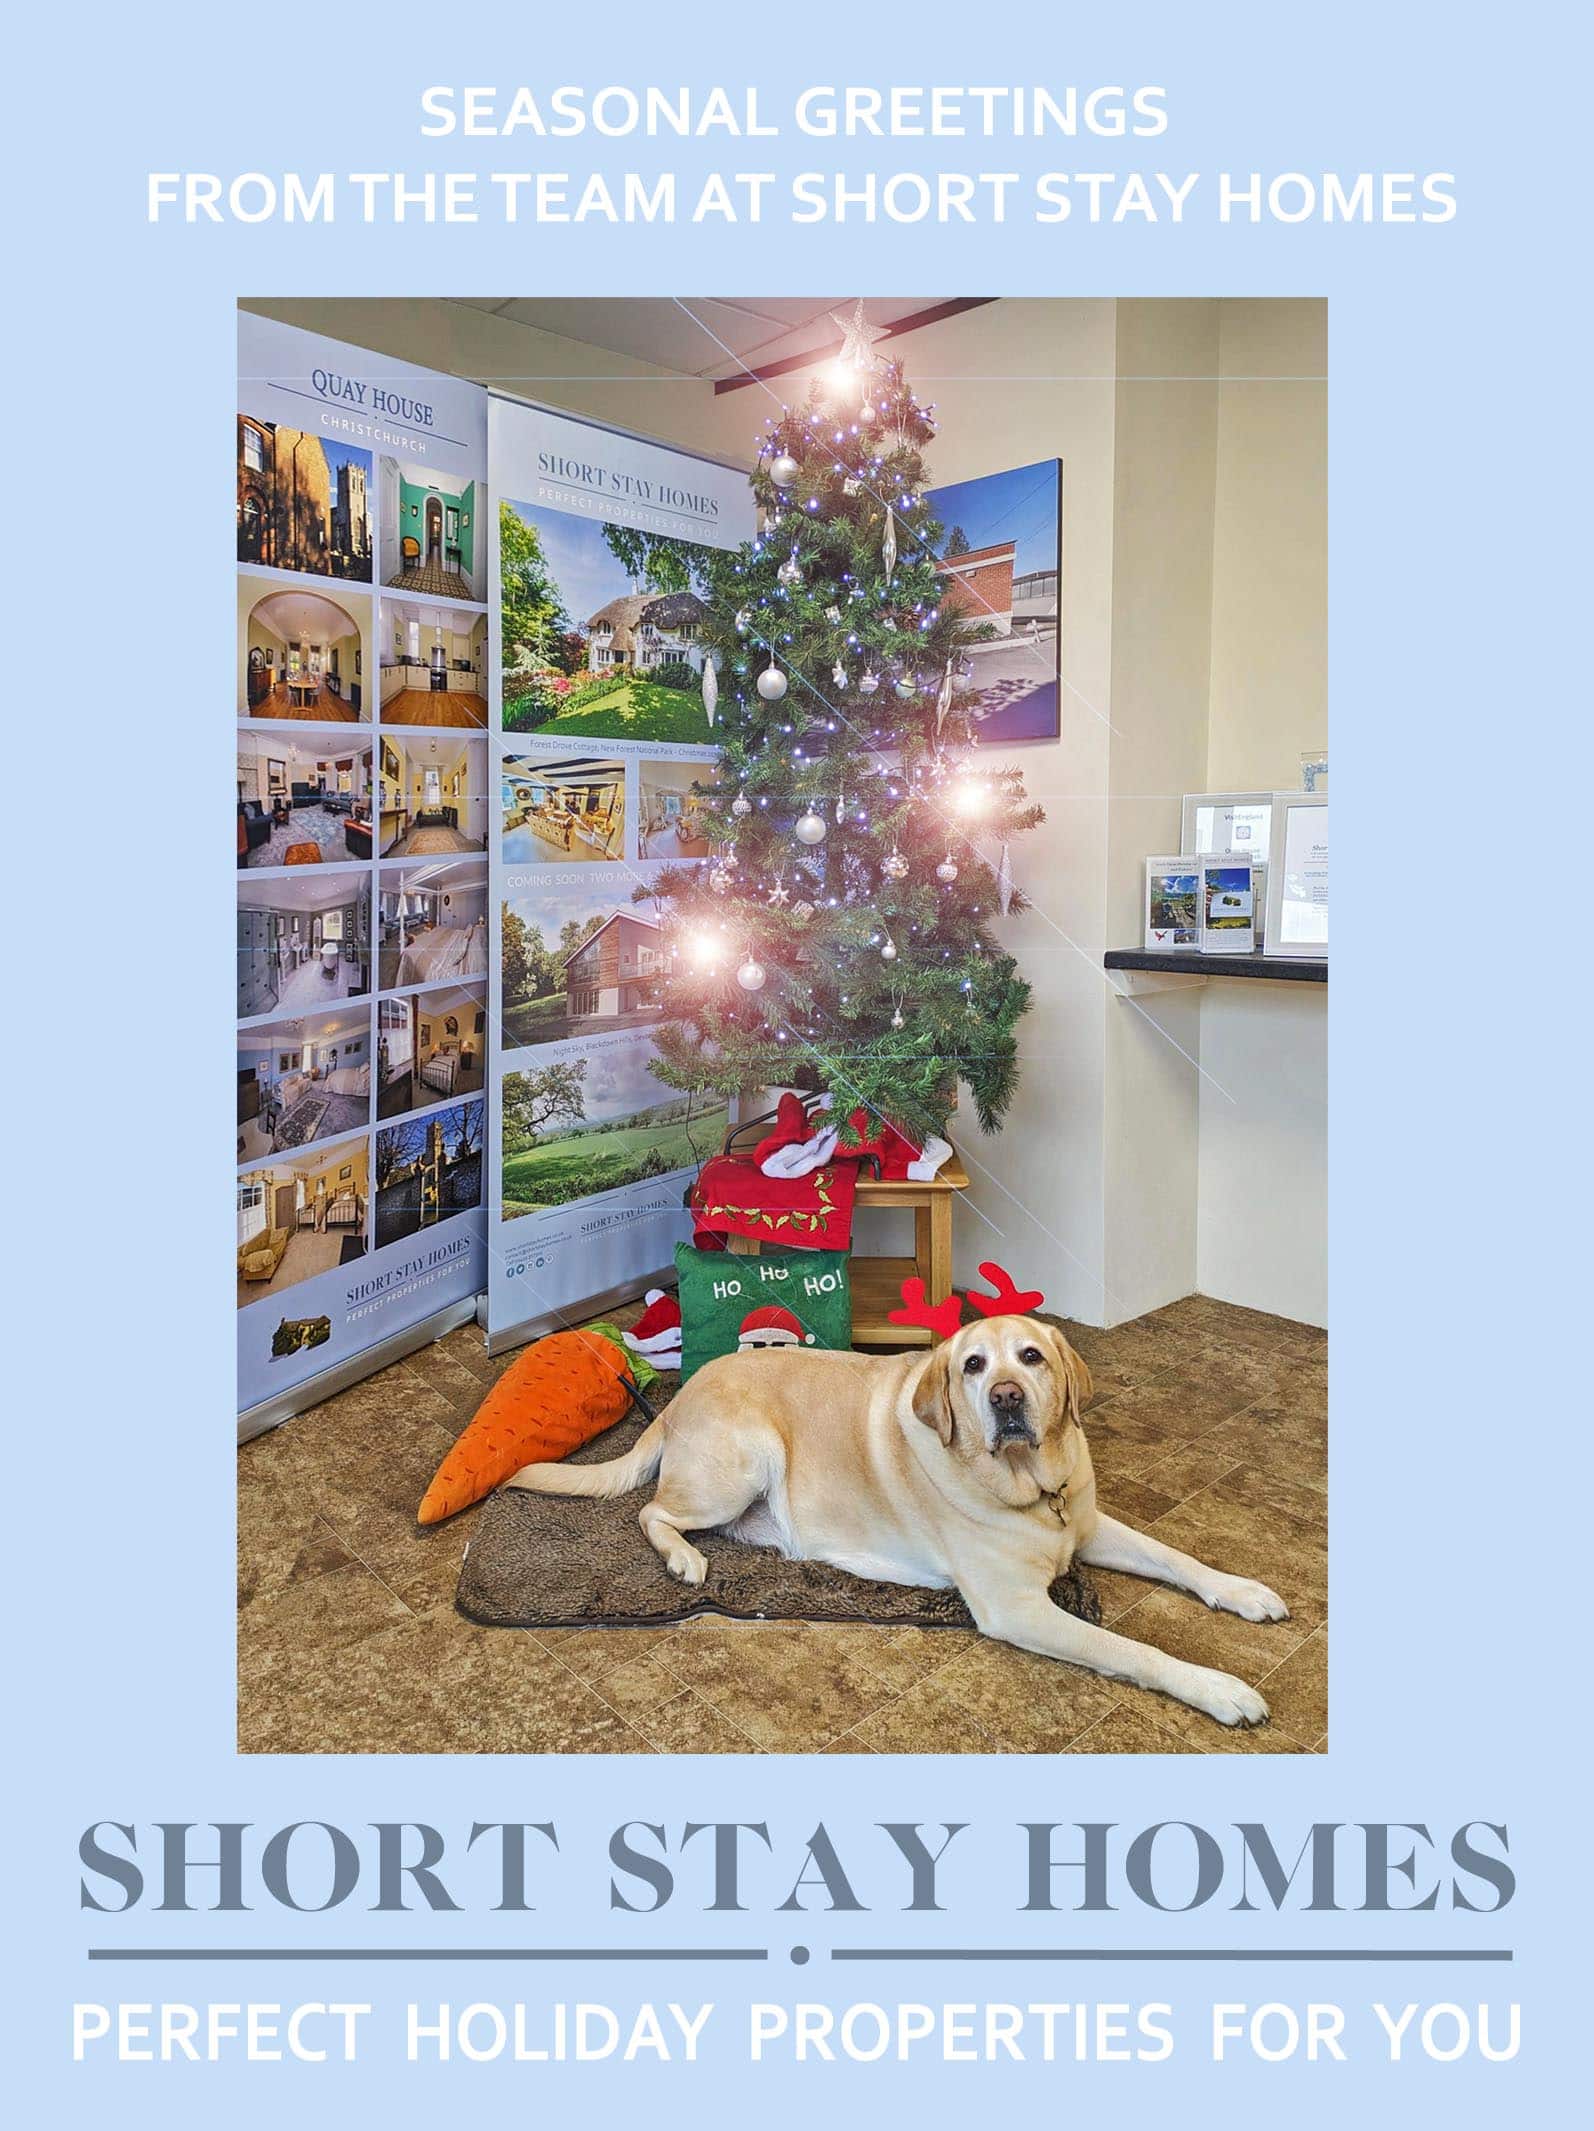 Season Greetings from the offices at Short Stay Homes including the office dog Buddy